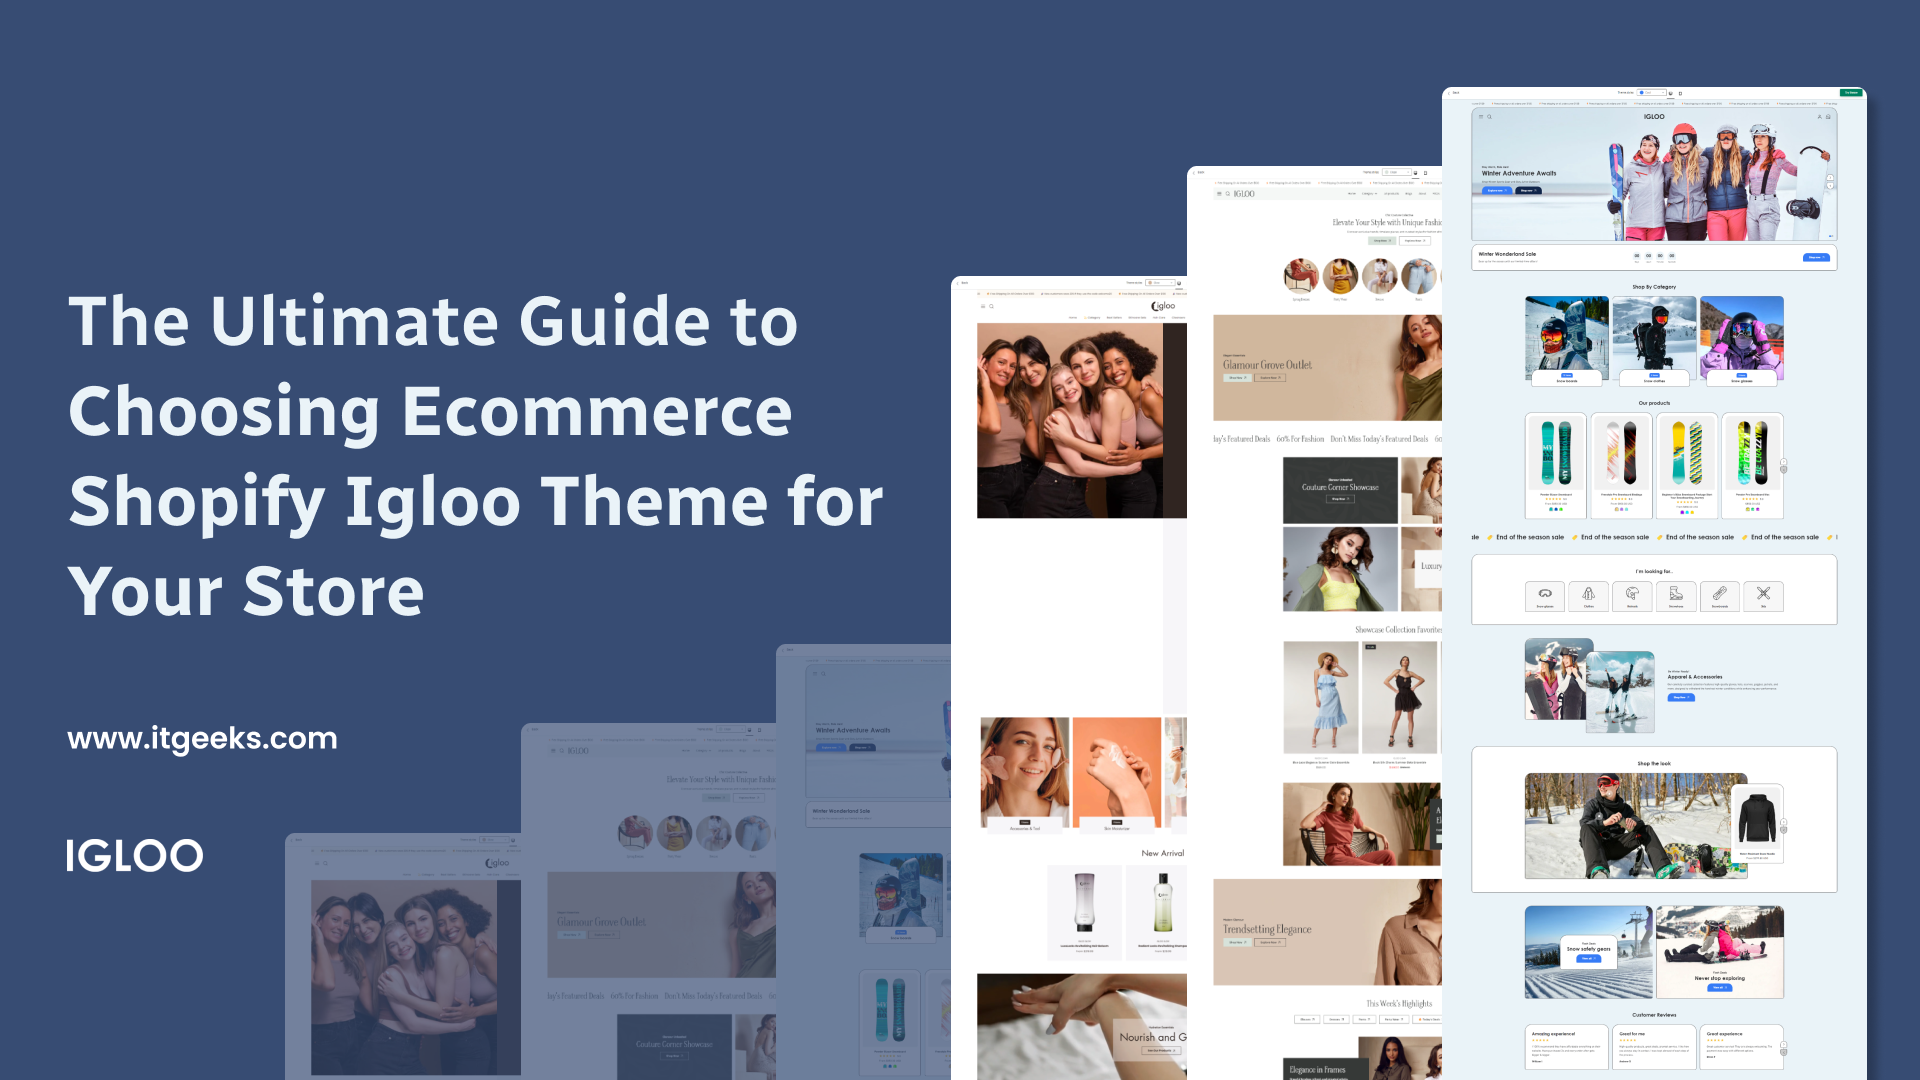 The Ultimate Guide to Choosing Ecommerce Shopify Igloo Theme for Your Store